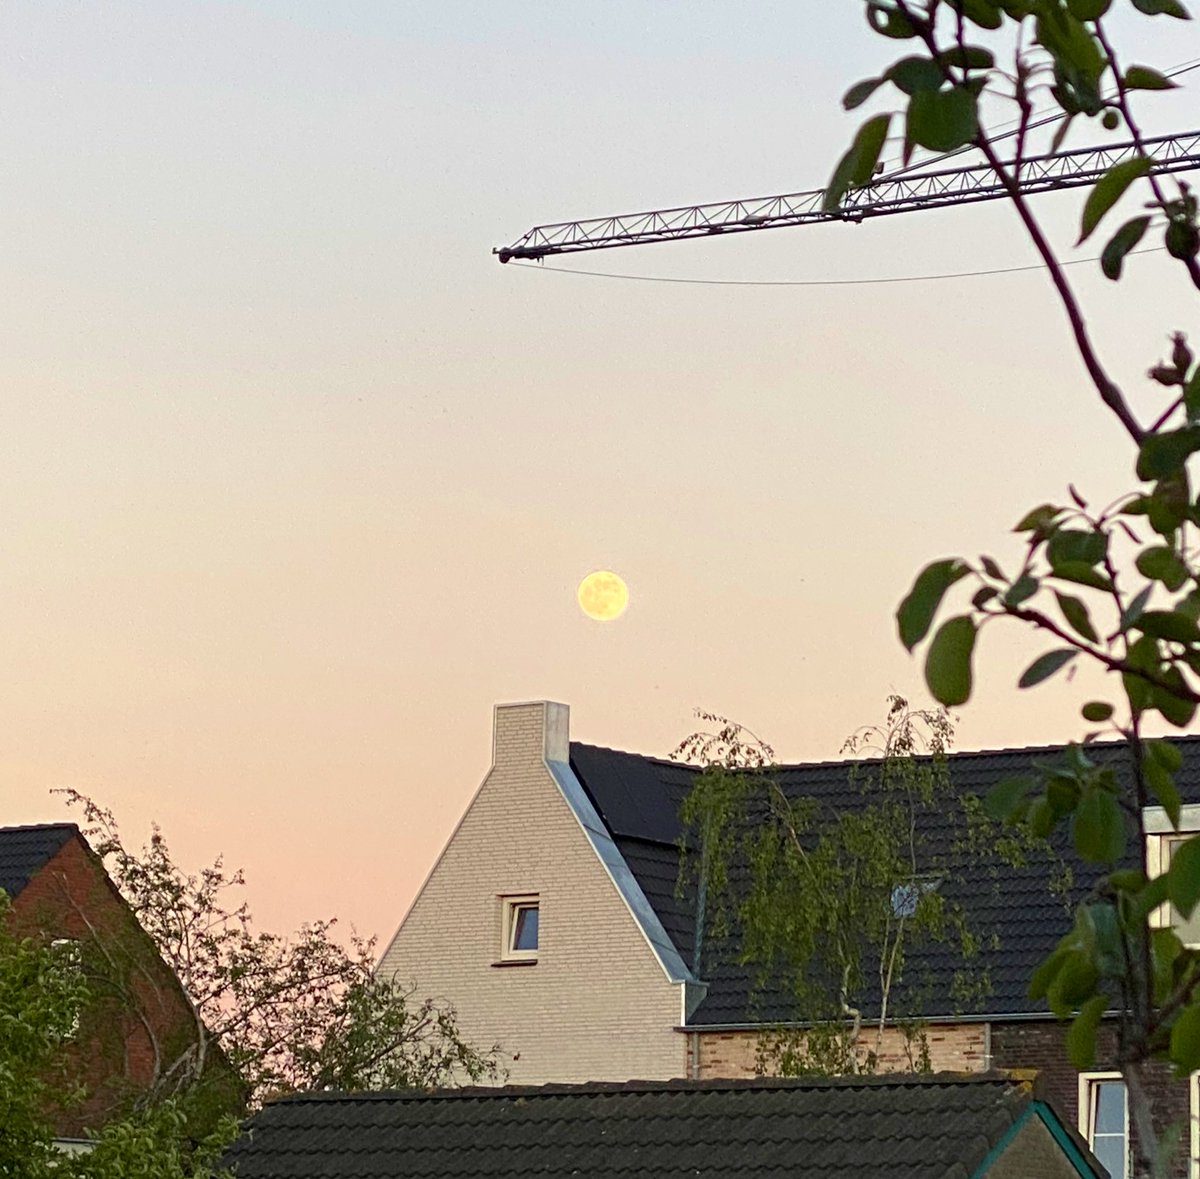 Day 127. Groceries, cleaned the house, school and went for a run. (look how nice the moon looked!)